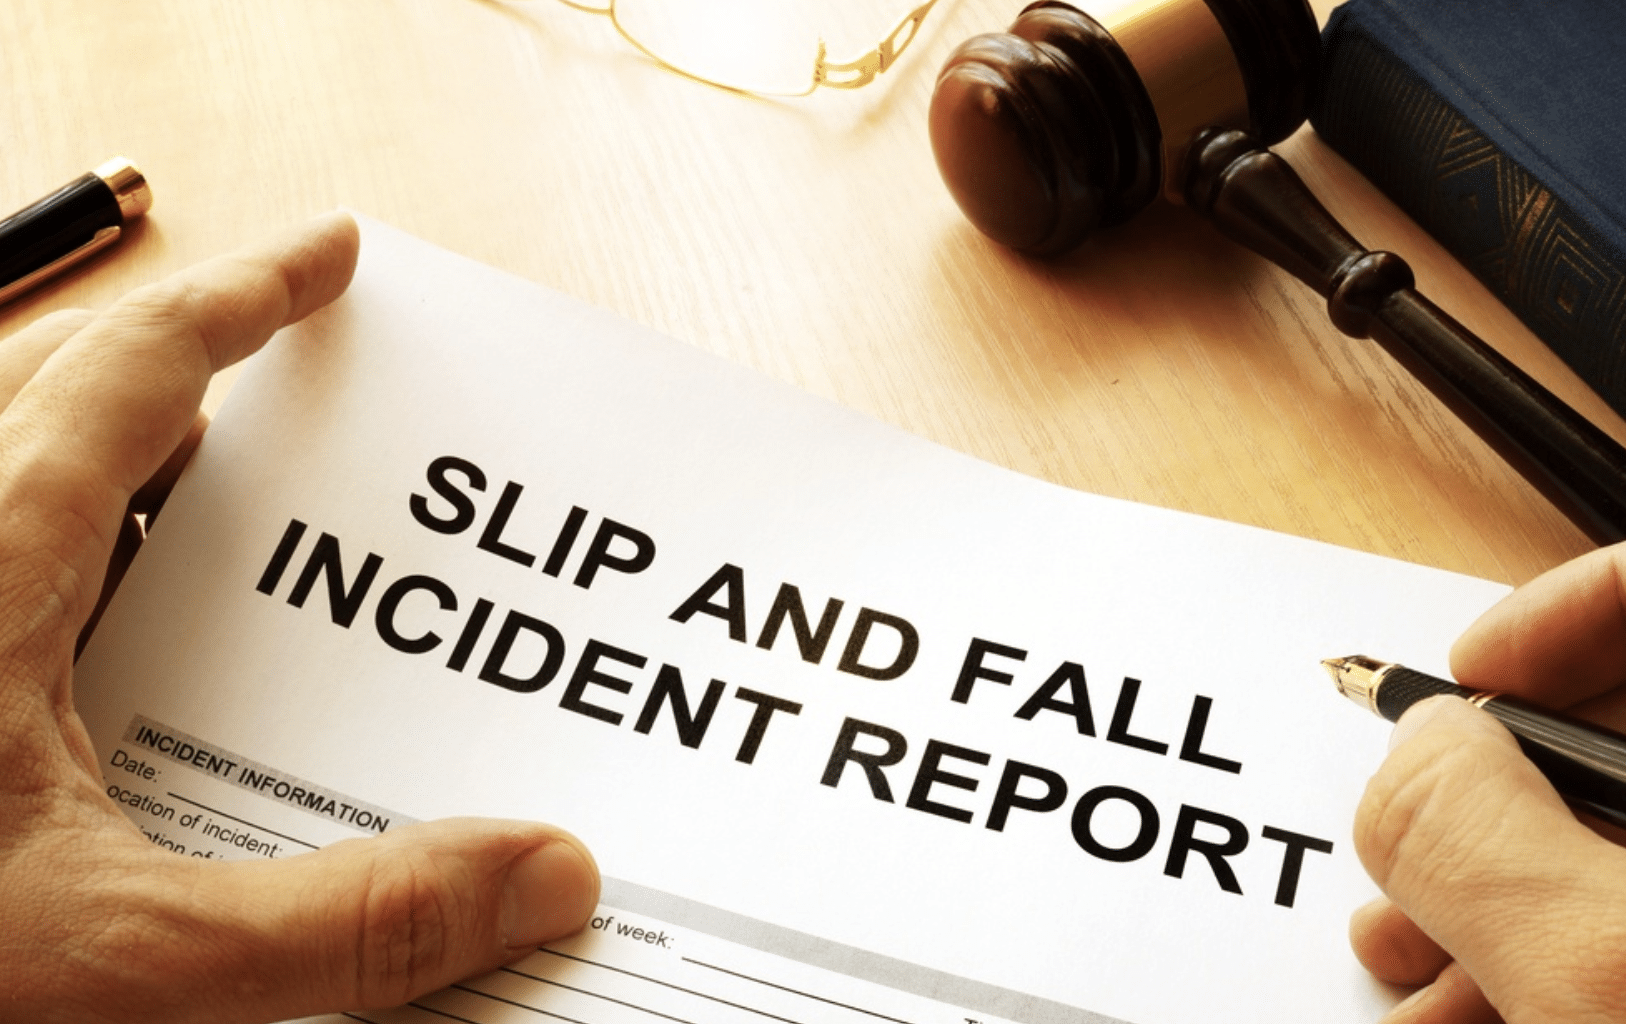 slip and fall incident report